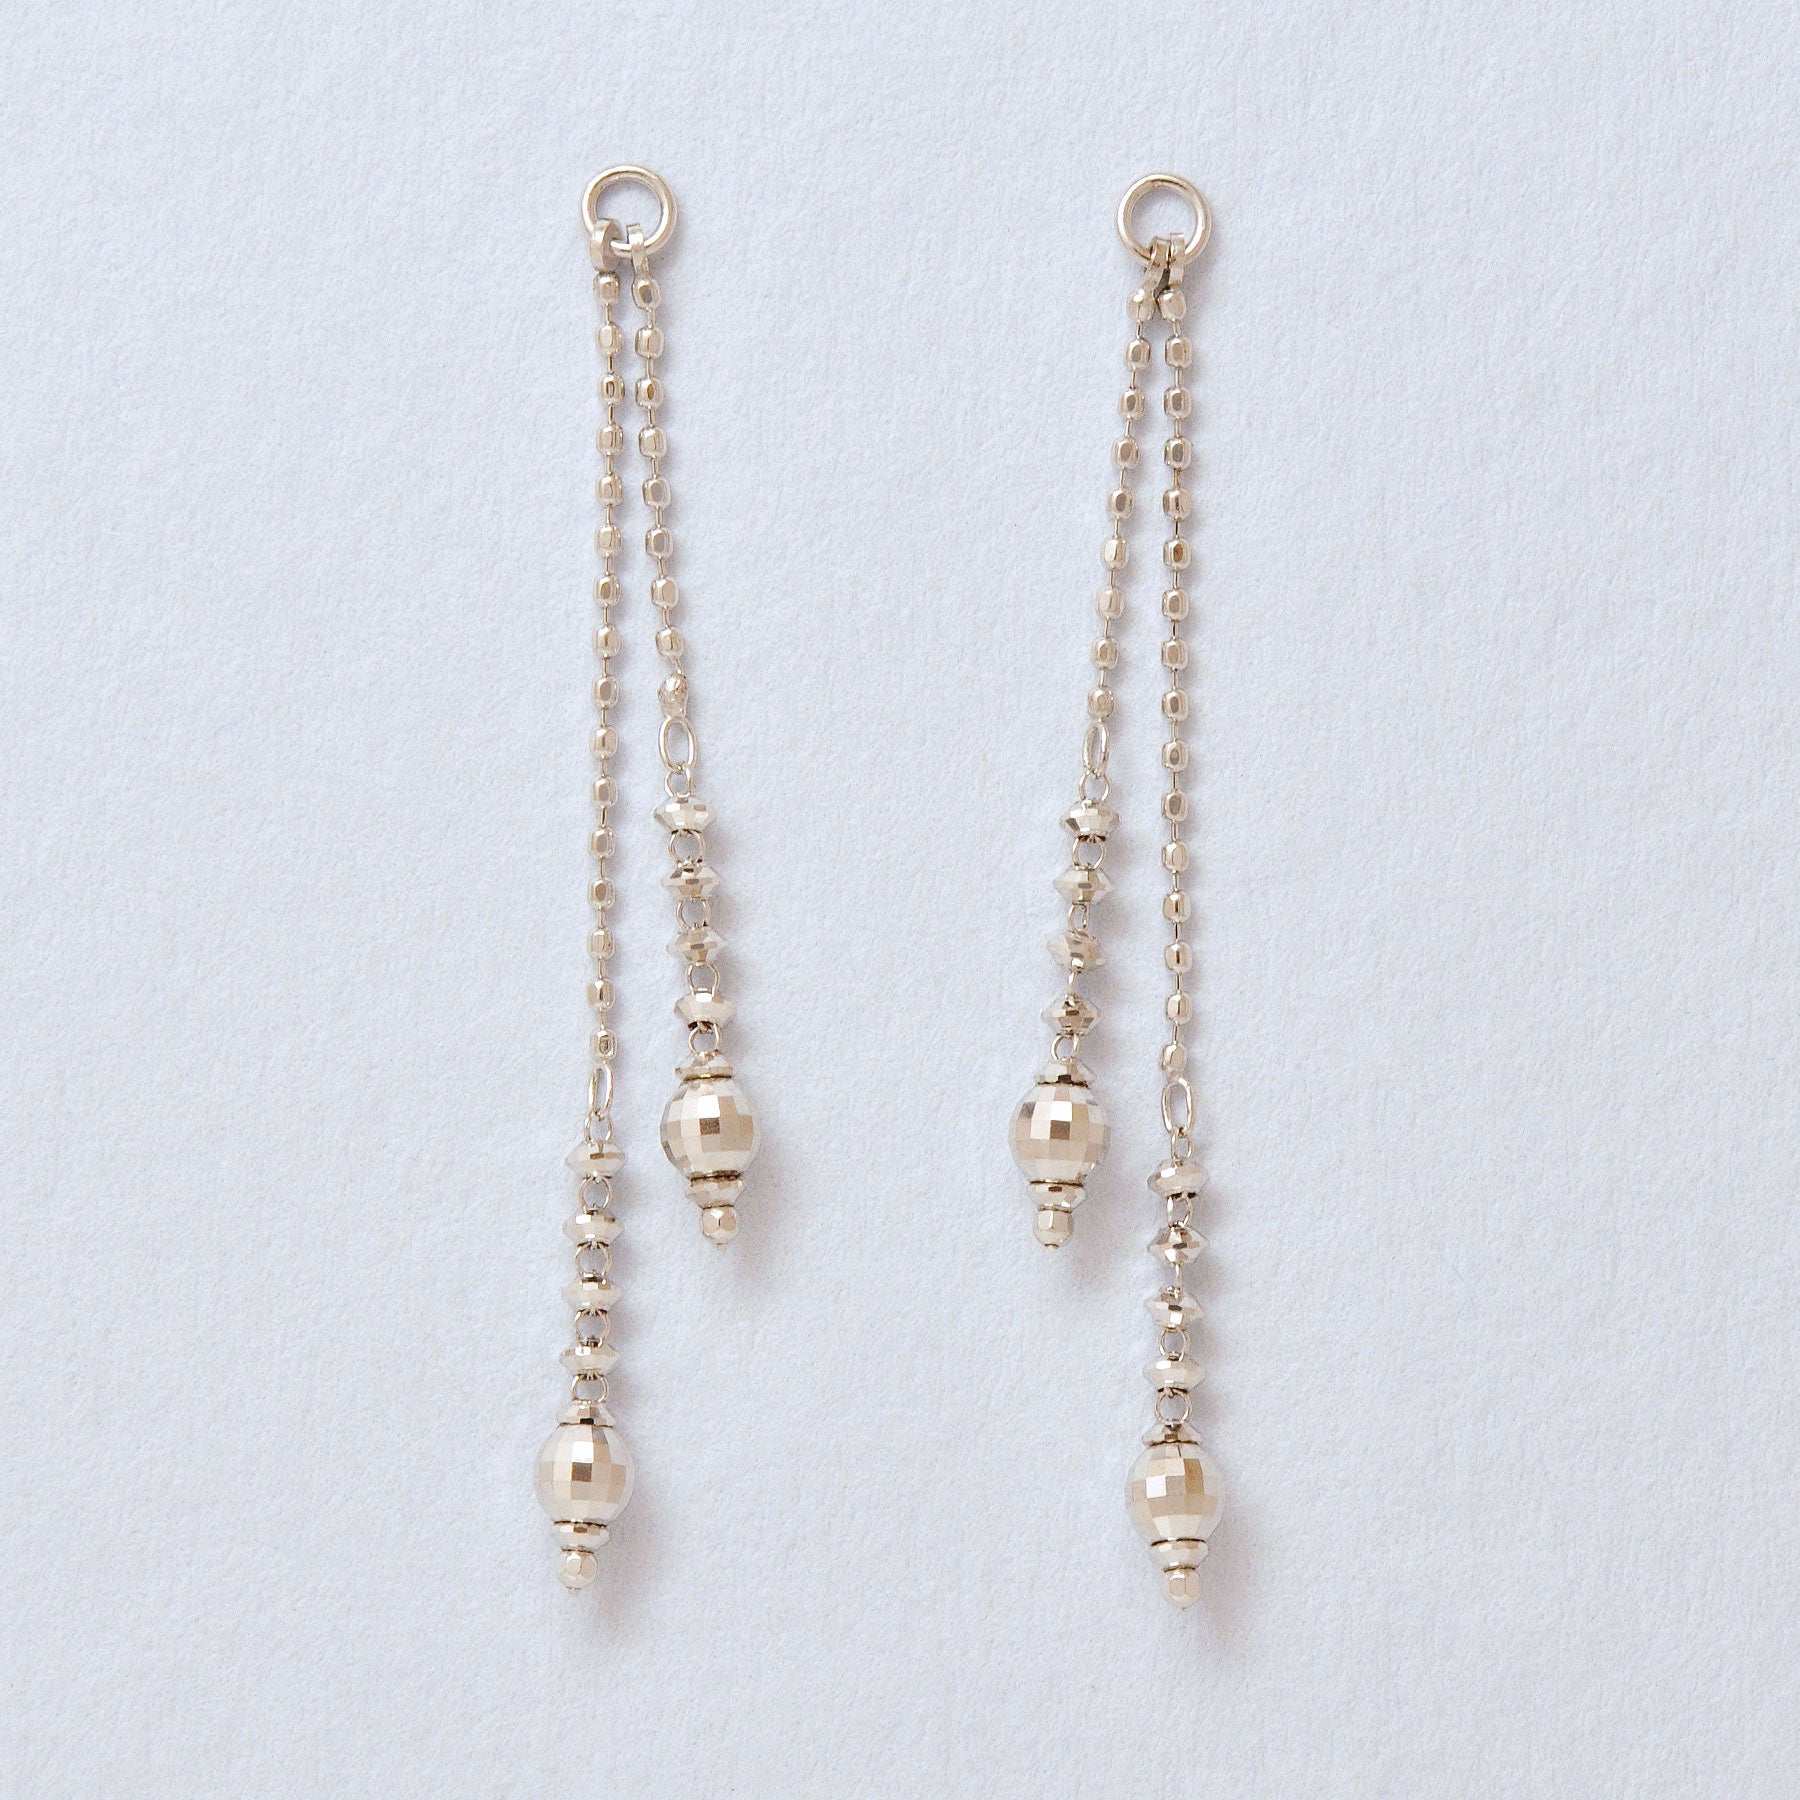 [Palette] Twin Mirror Earring Charms (10K White Gold) - Product Image